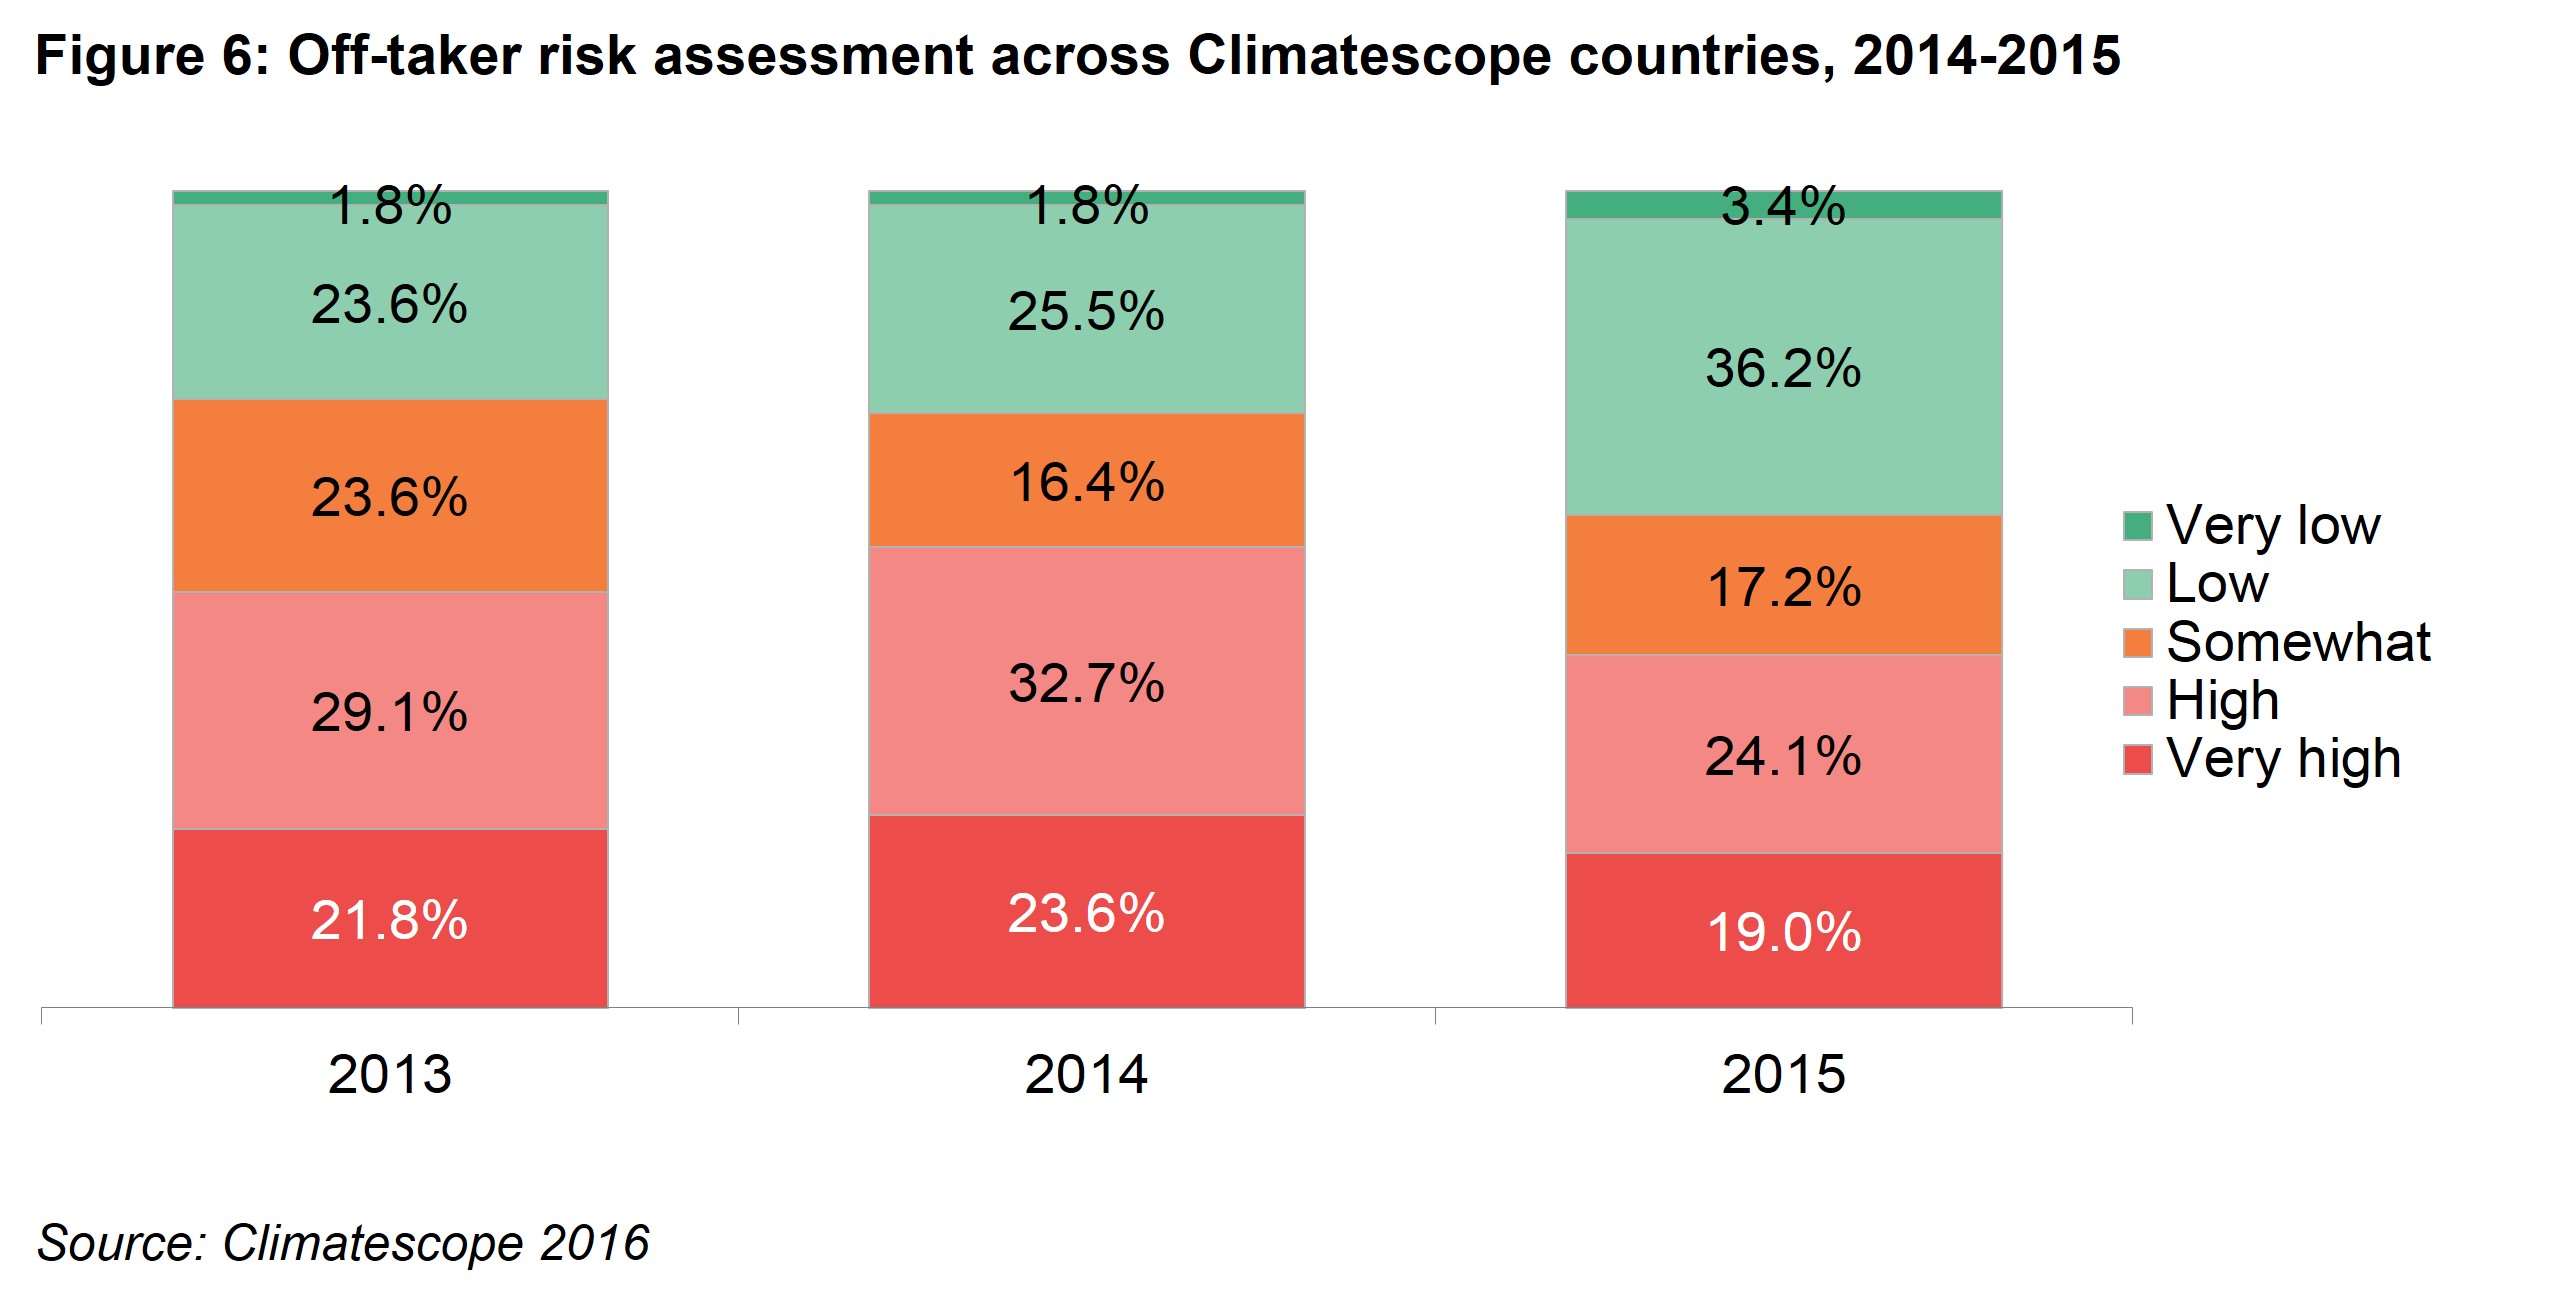 PI Fig 6 - Off-taker risk assessment across Climatescope countries, 2014-2015